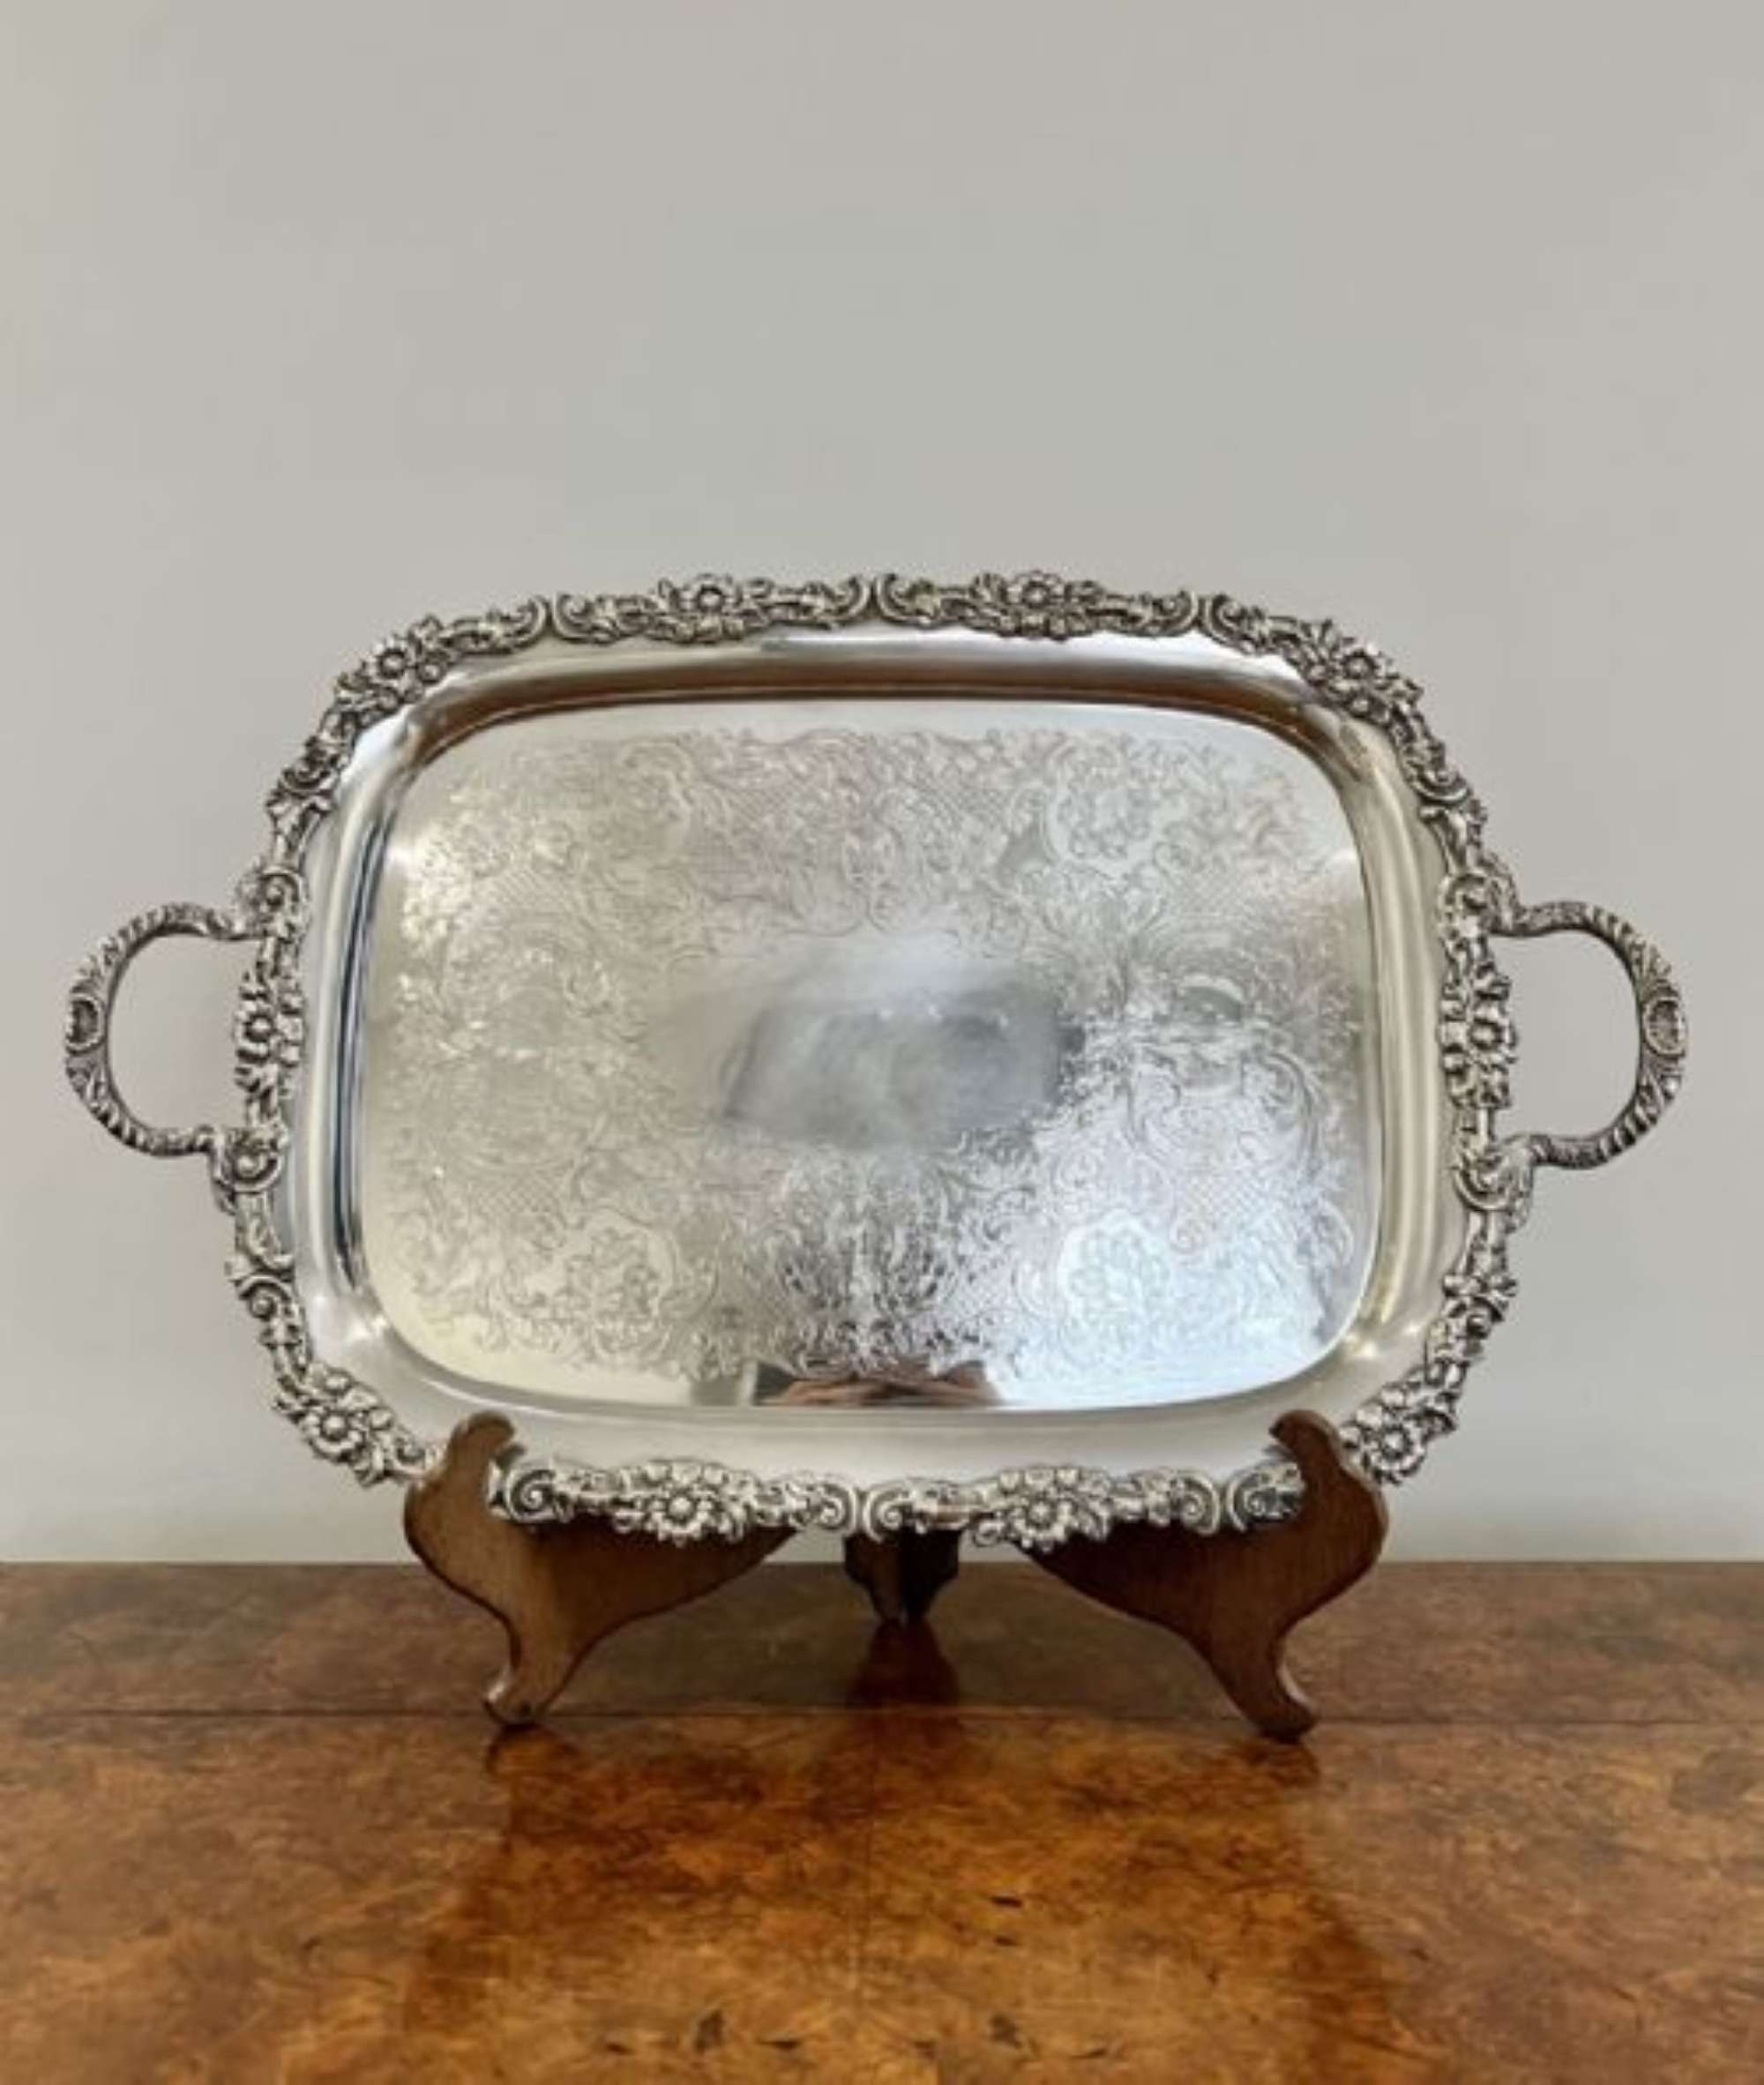 Fantastic Quality Antique Victorian Silver Plated Ornate Serving Tray